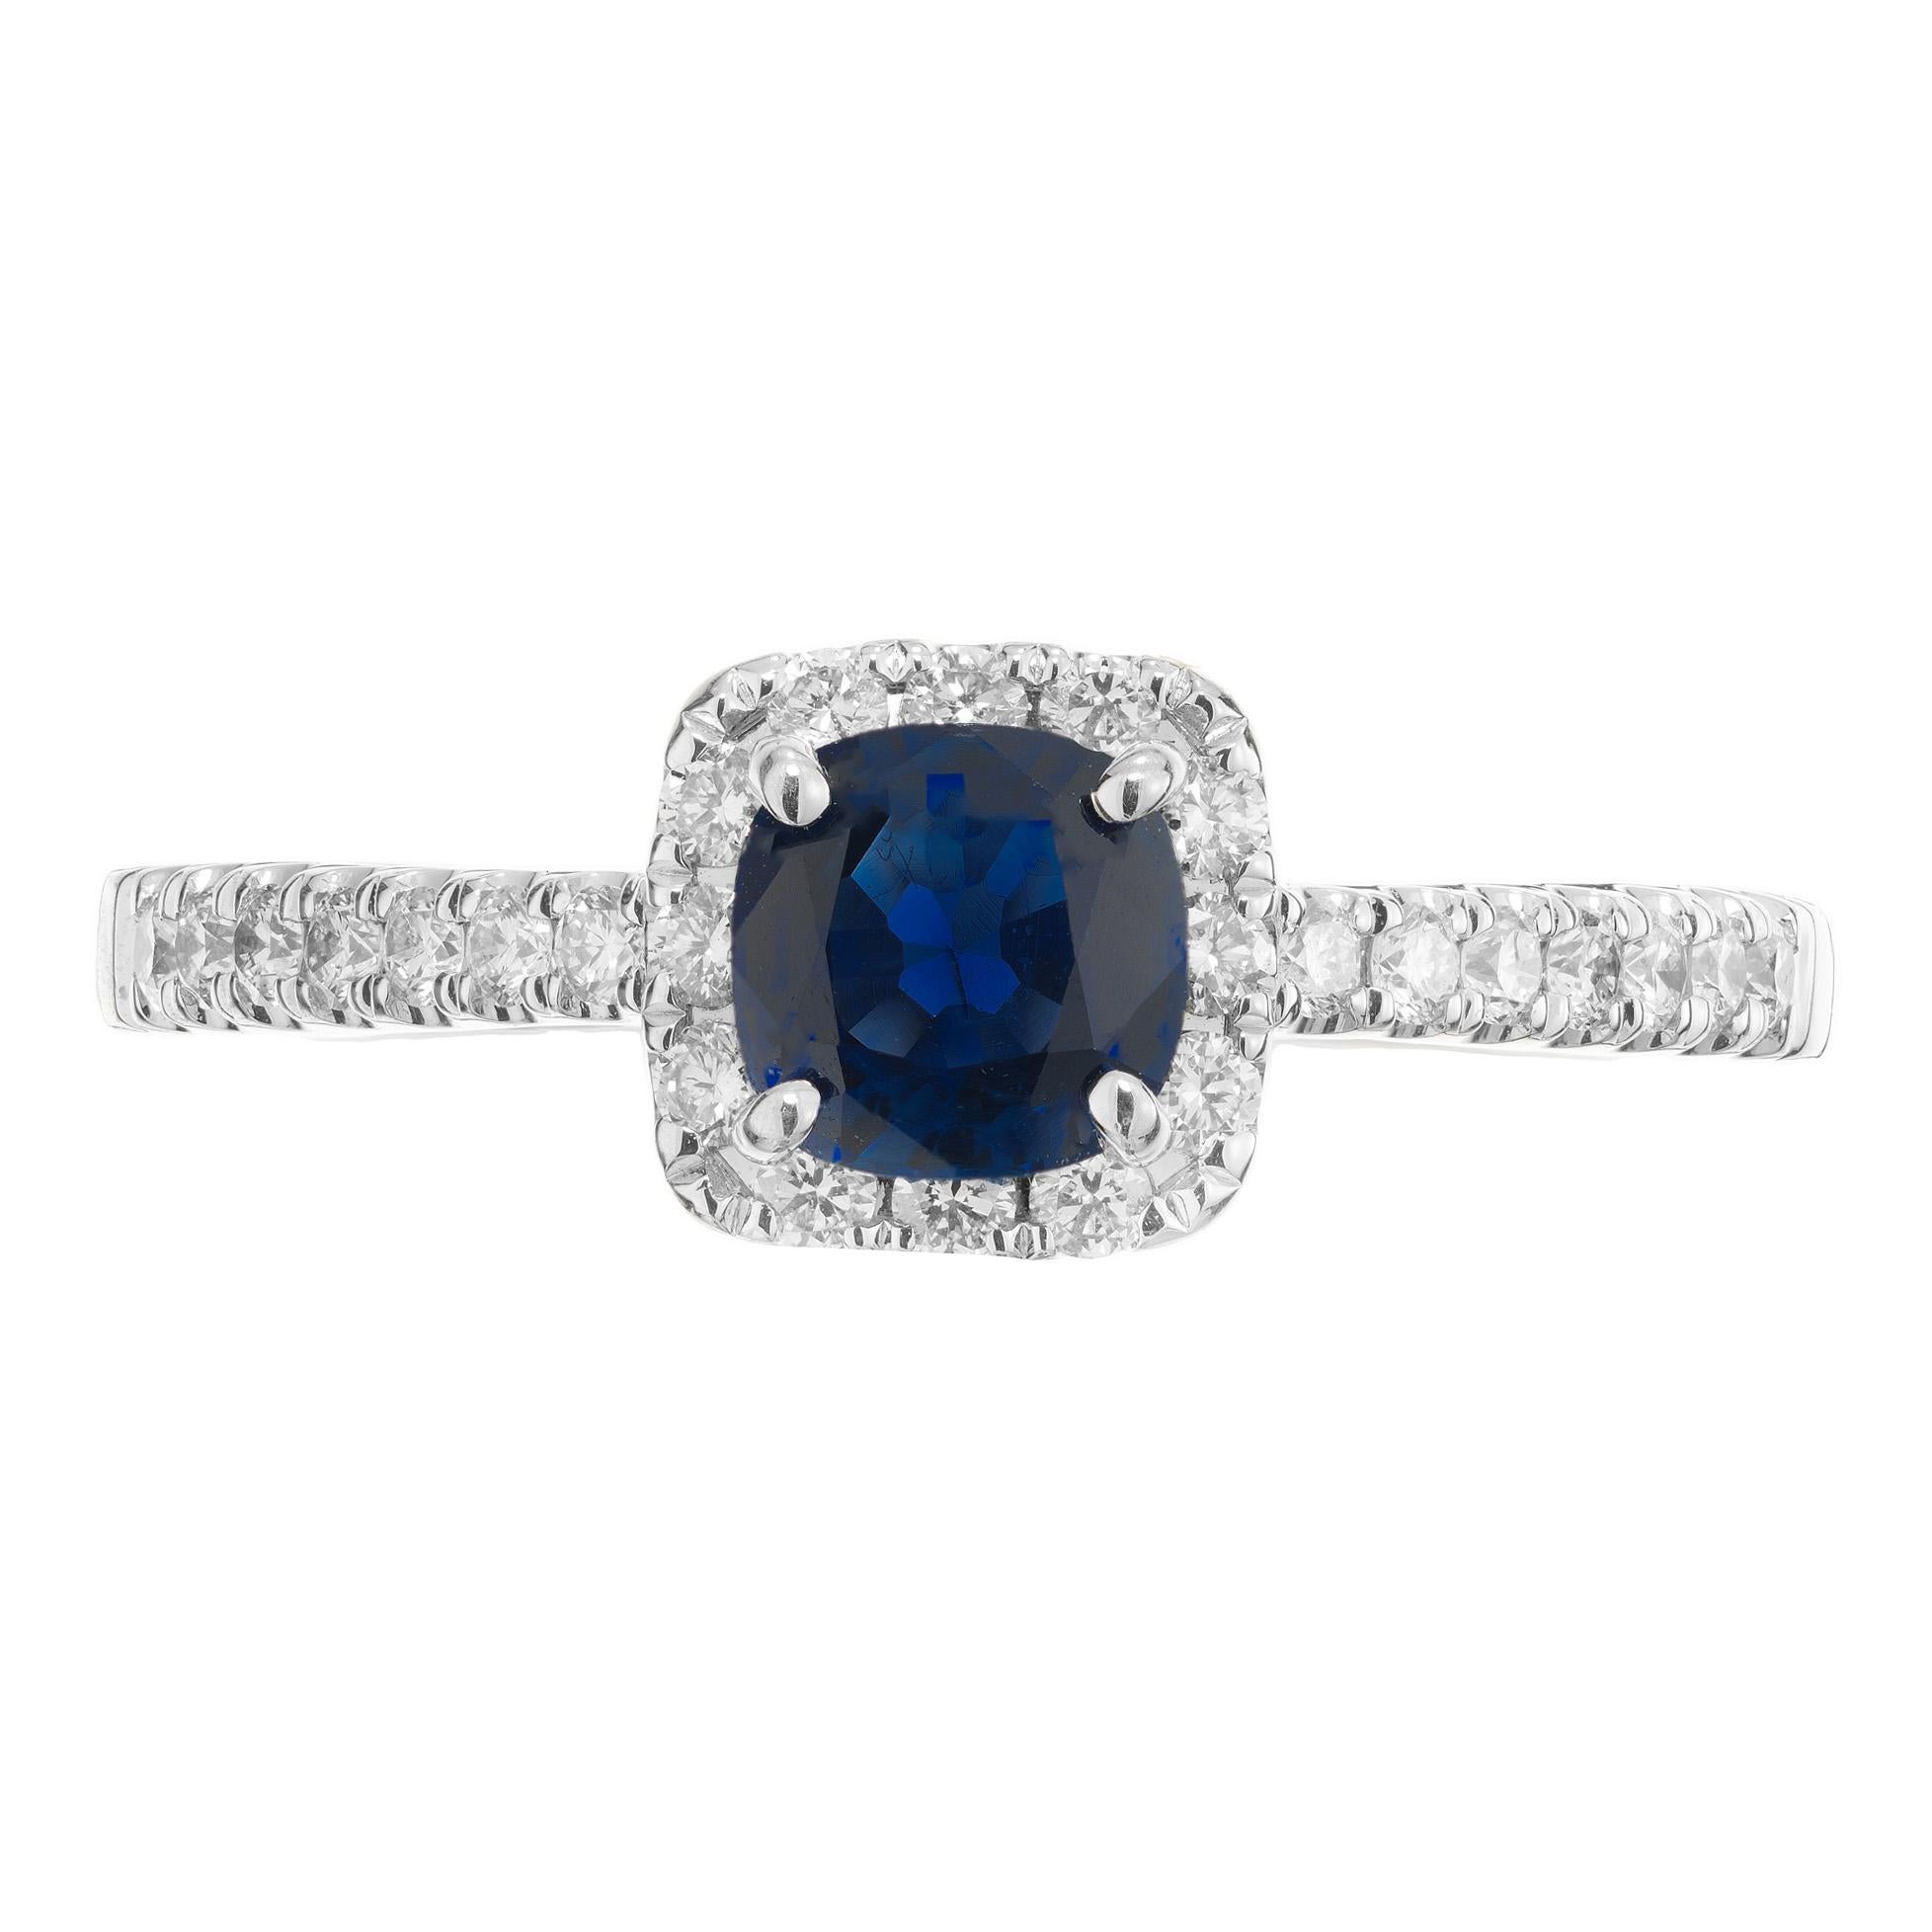 Rich blue cushion cut sapphire in a classic 14k white gold halo ring. .77ct cushion cut blue center sapphire. Mounted in a 14k white gold diamond halo setting. Each shoulder is adorned with 7 round brilliant cut diamonds. Crafted with precision and